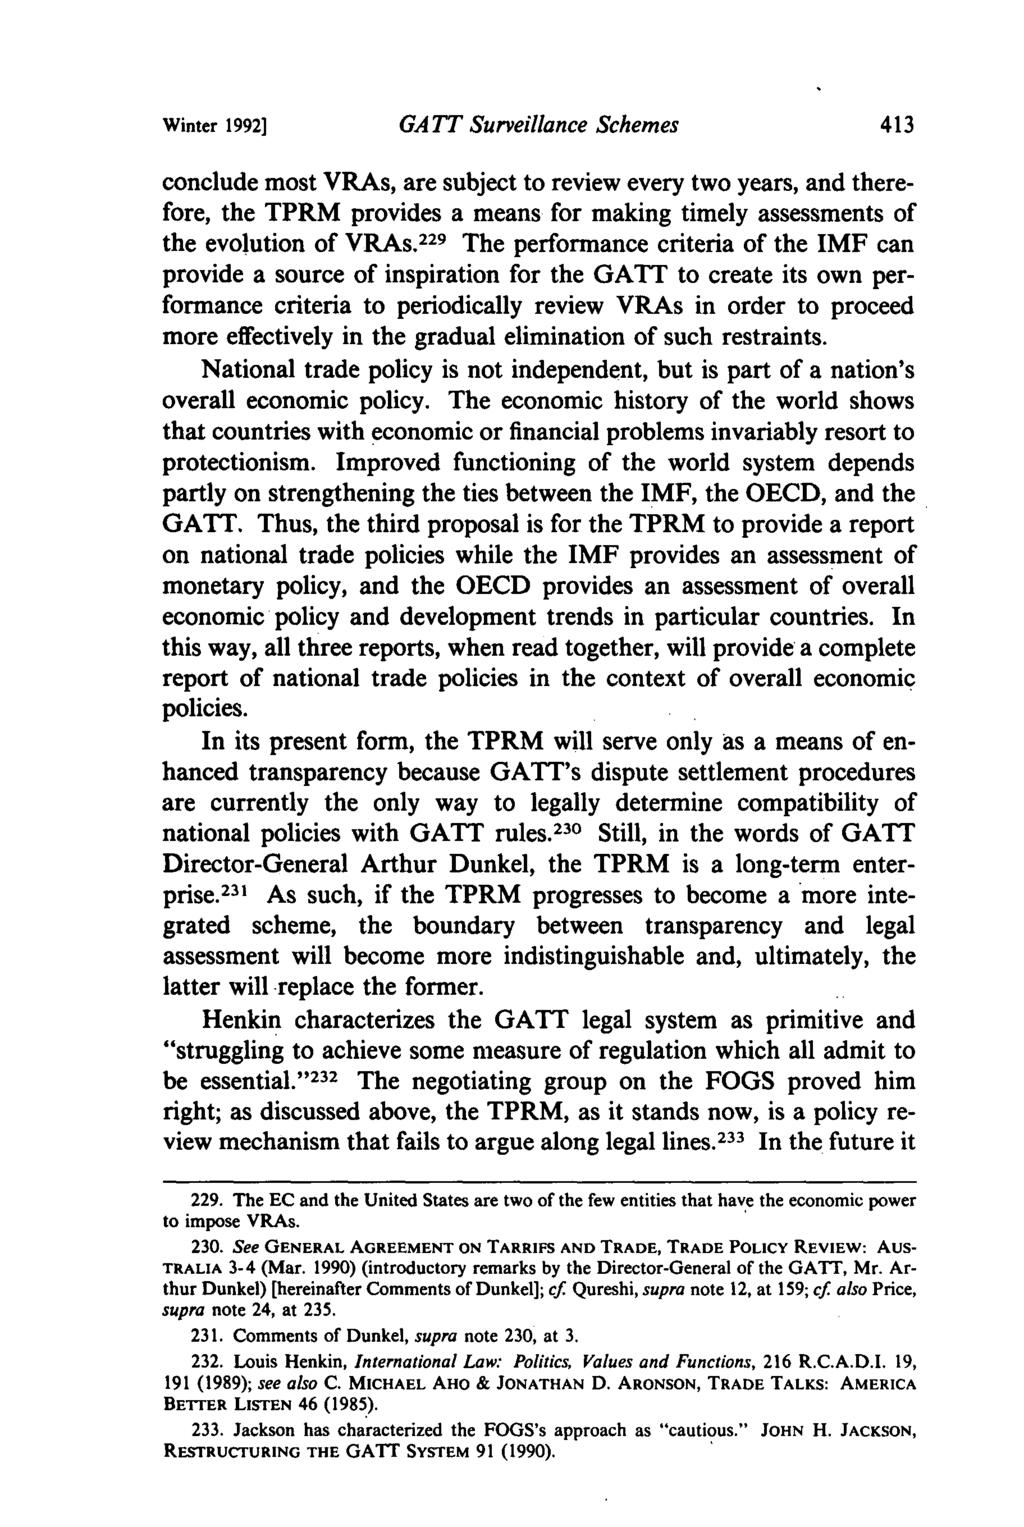 Winter 1992] GA TT Surveillance Schemes conclude most VRAs, are subject to review every two years, and therefore, the TPRM provides a means for making timely assessments of the evolution of VRAs.